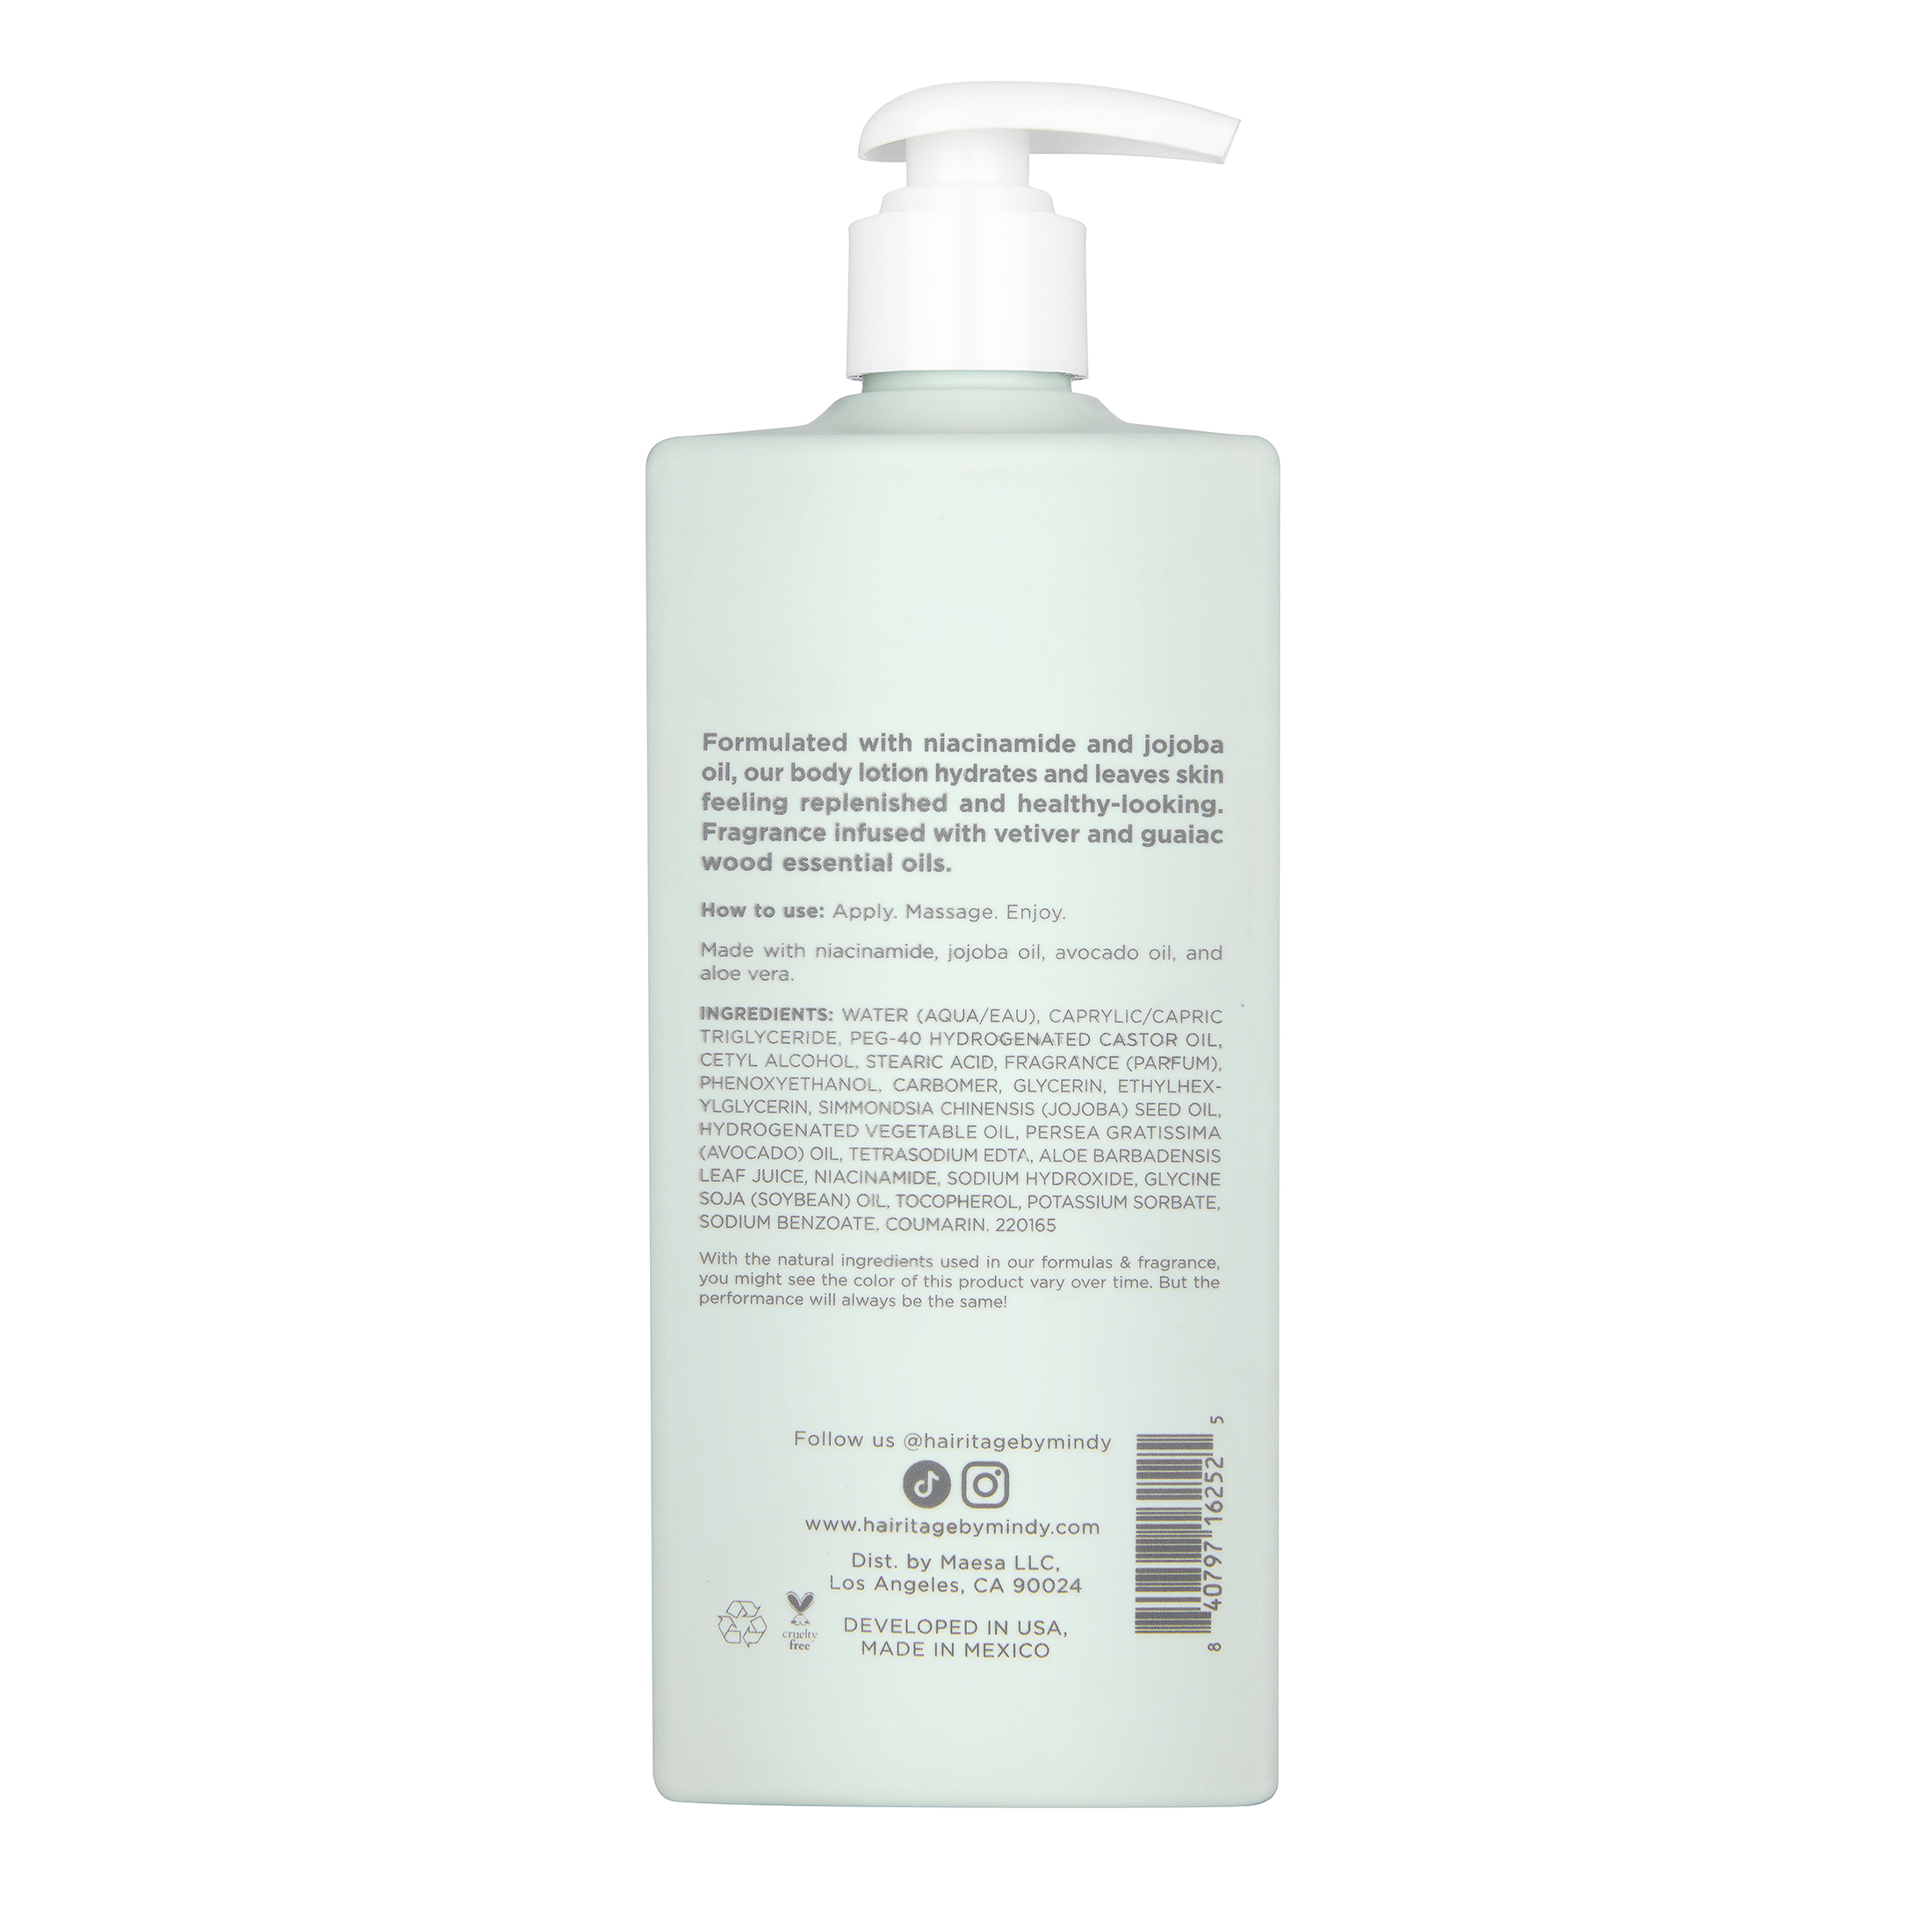 Hairitage Soak it In Cherry & Amber Scented Body Lotion | Niacinamide, Jojoba Oil, & Avocado Oil for All Skin Types | Vetiver & Guaiac Wood Essential Oils, 14 fl. oz. - image 2 of 8